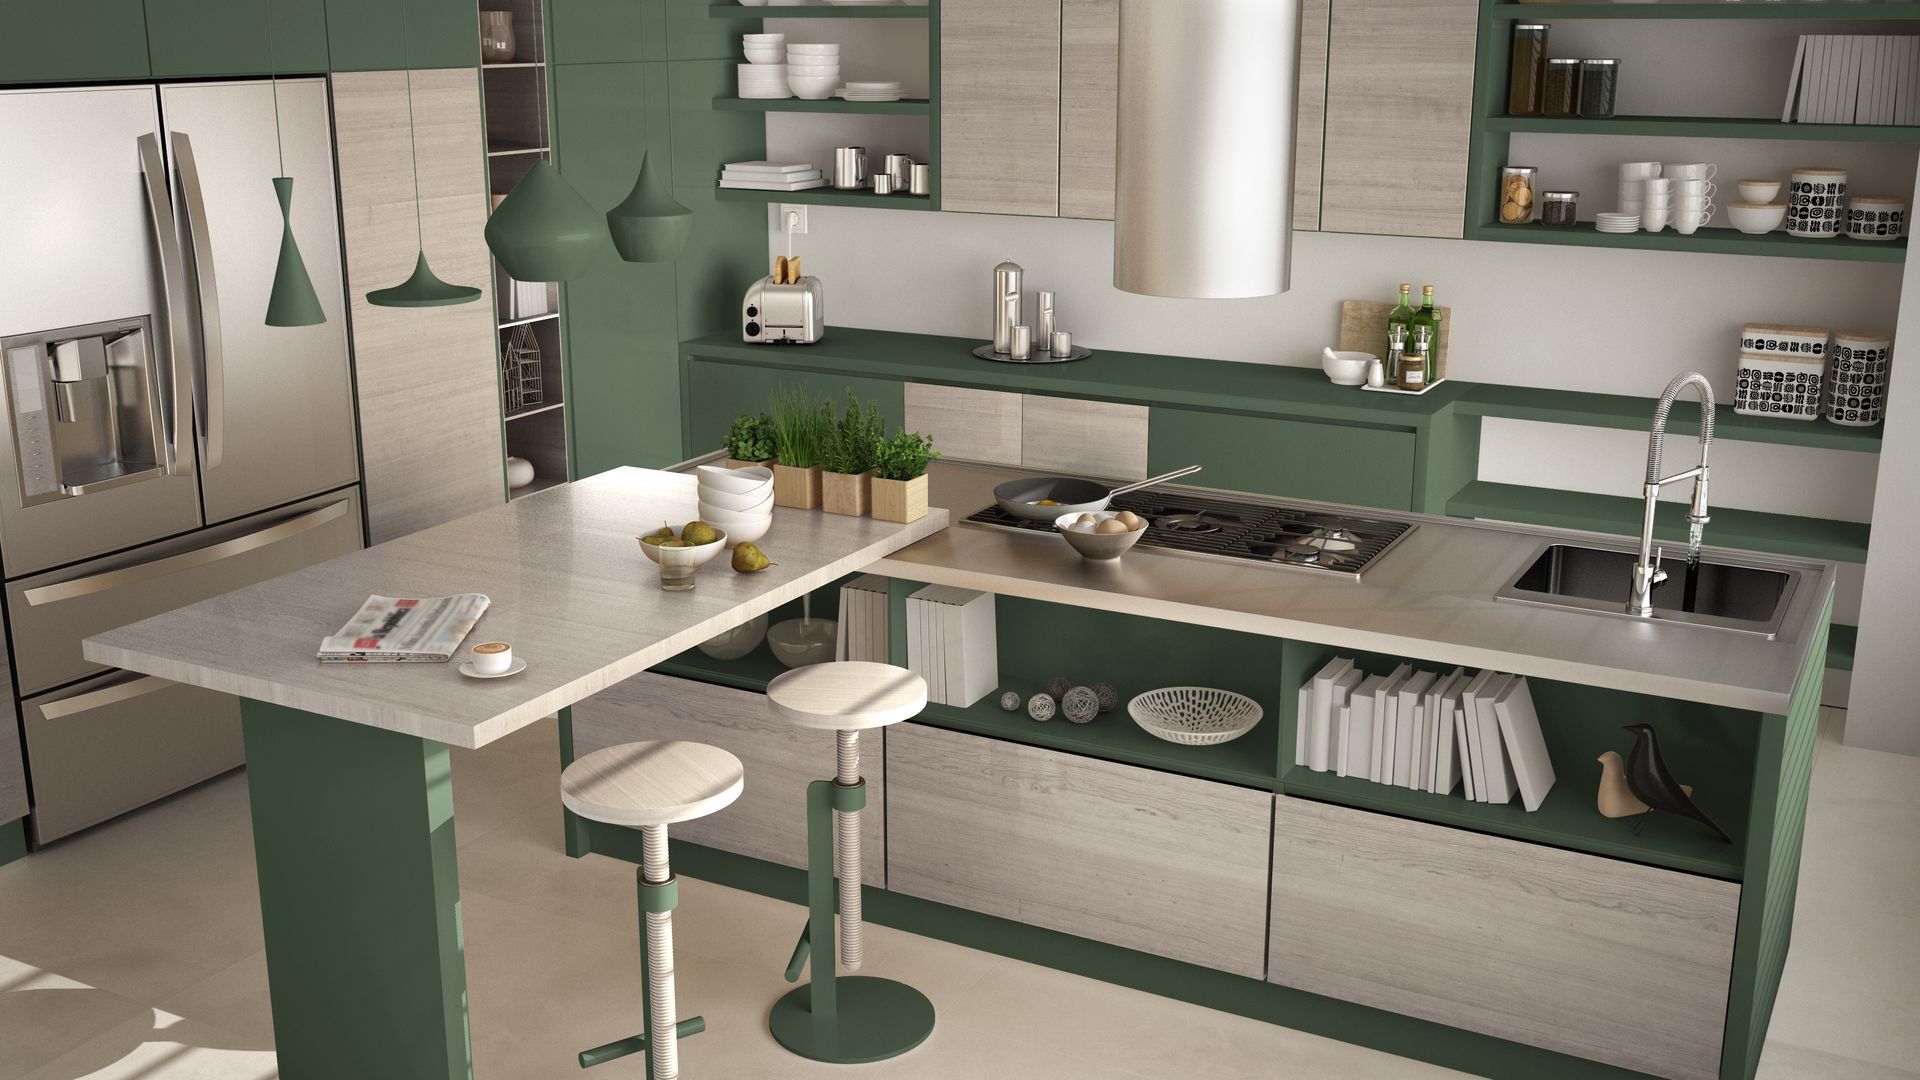 Modern Green Kitchen Island With Shelves and Cabinets